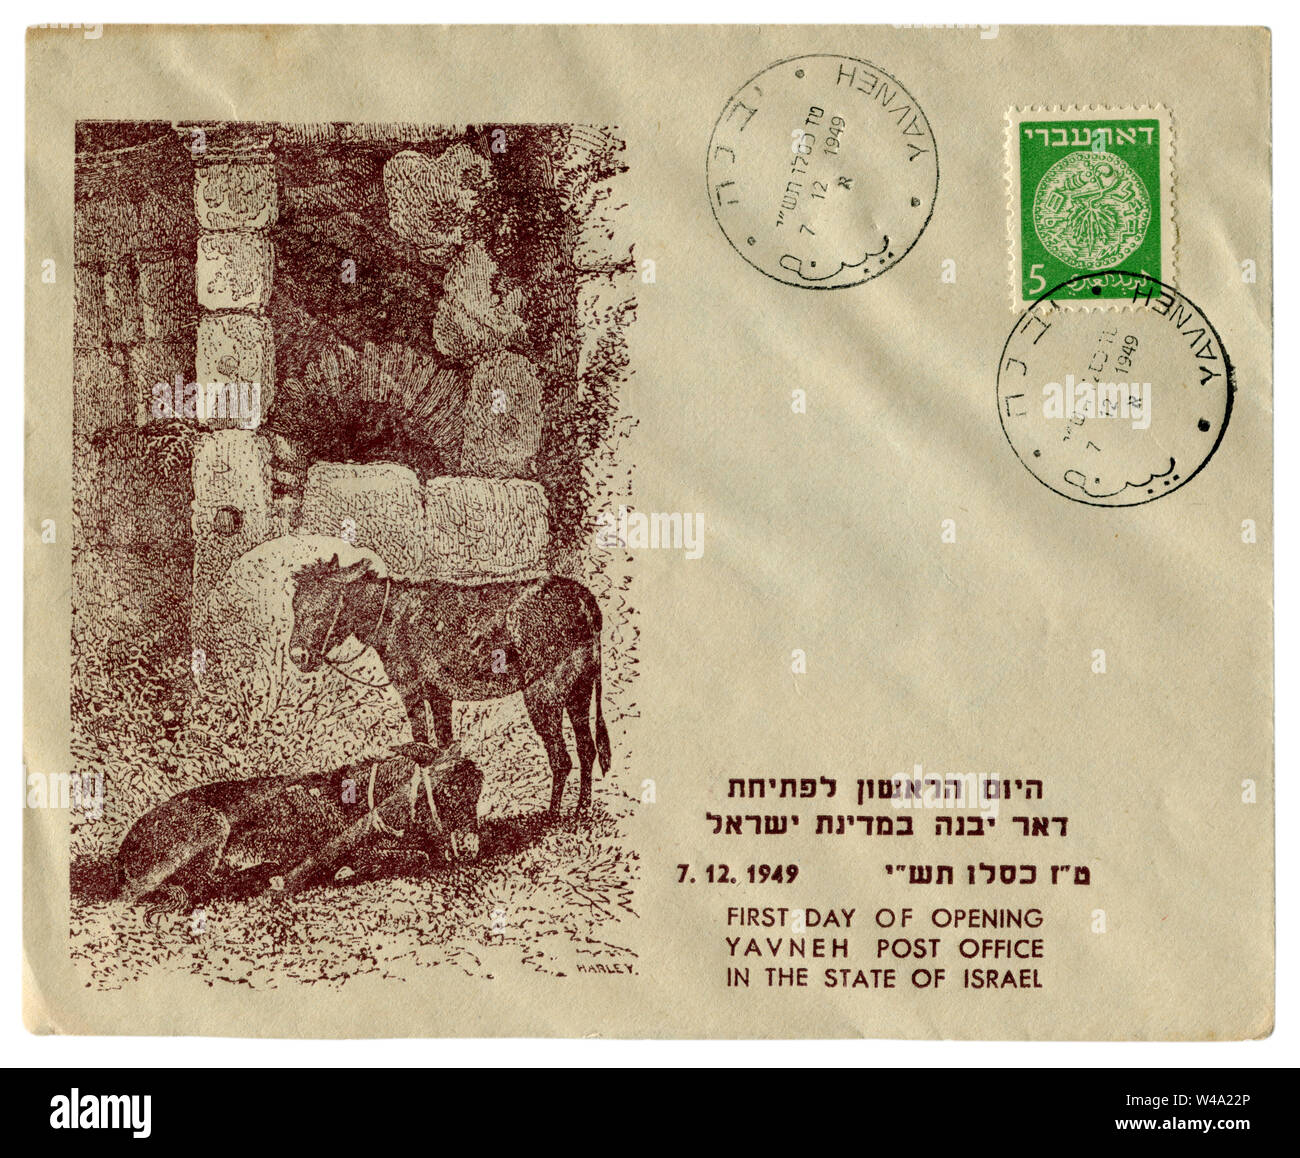 Yavneh, Israel - 7 Decemer 1949: Israeli historical envelope: cover with cachet First day of opening post office, donkeys resting near ancient ruins Stock Photo